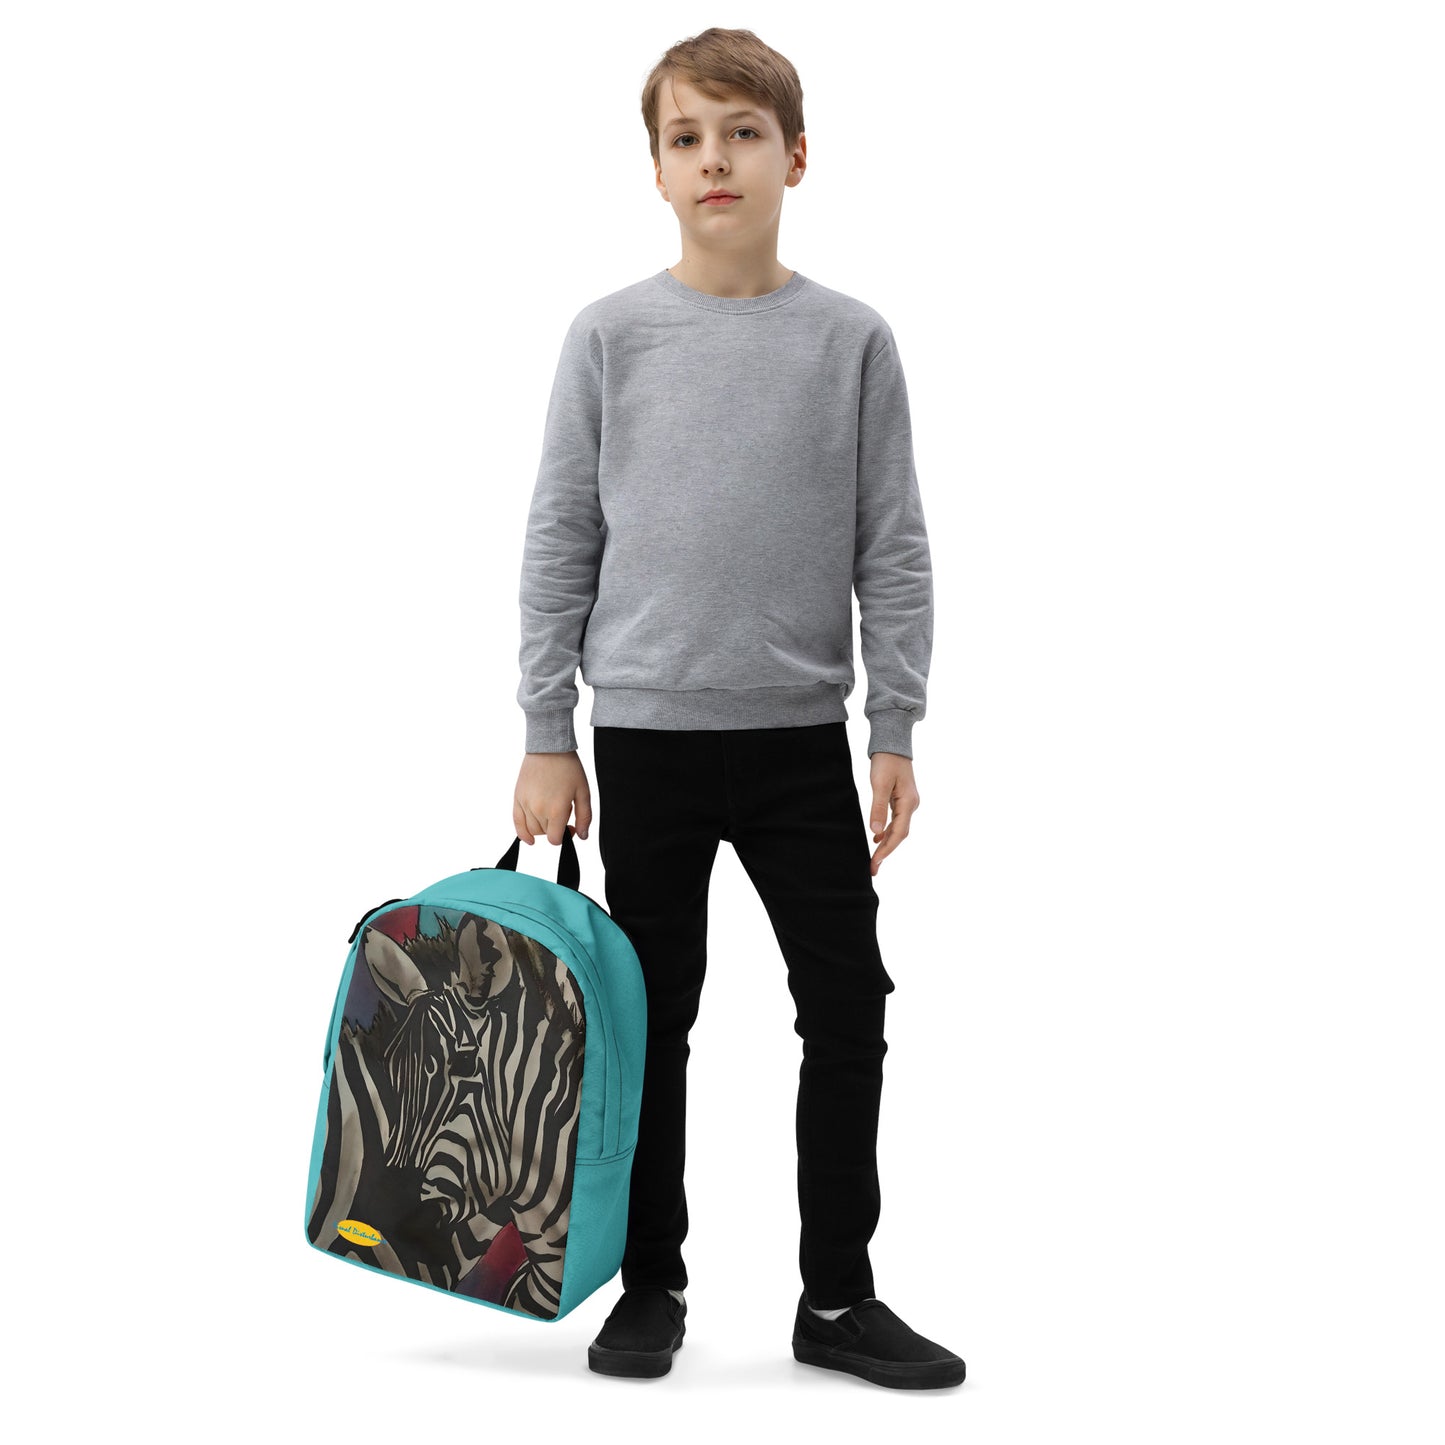 Zebra in the Sun with Teal Minimalist Backpack